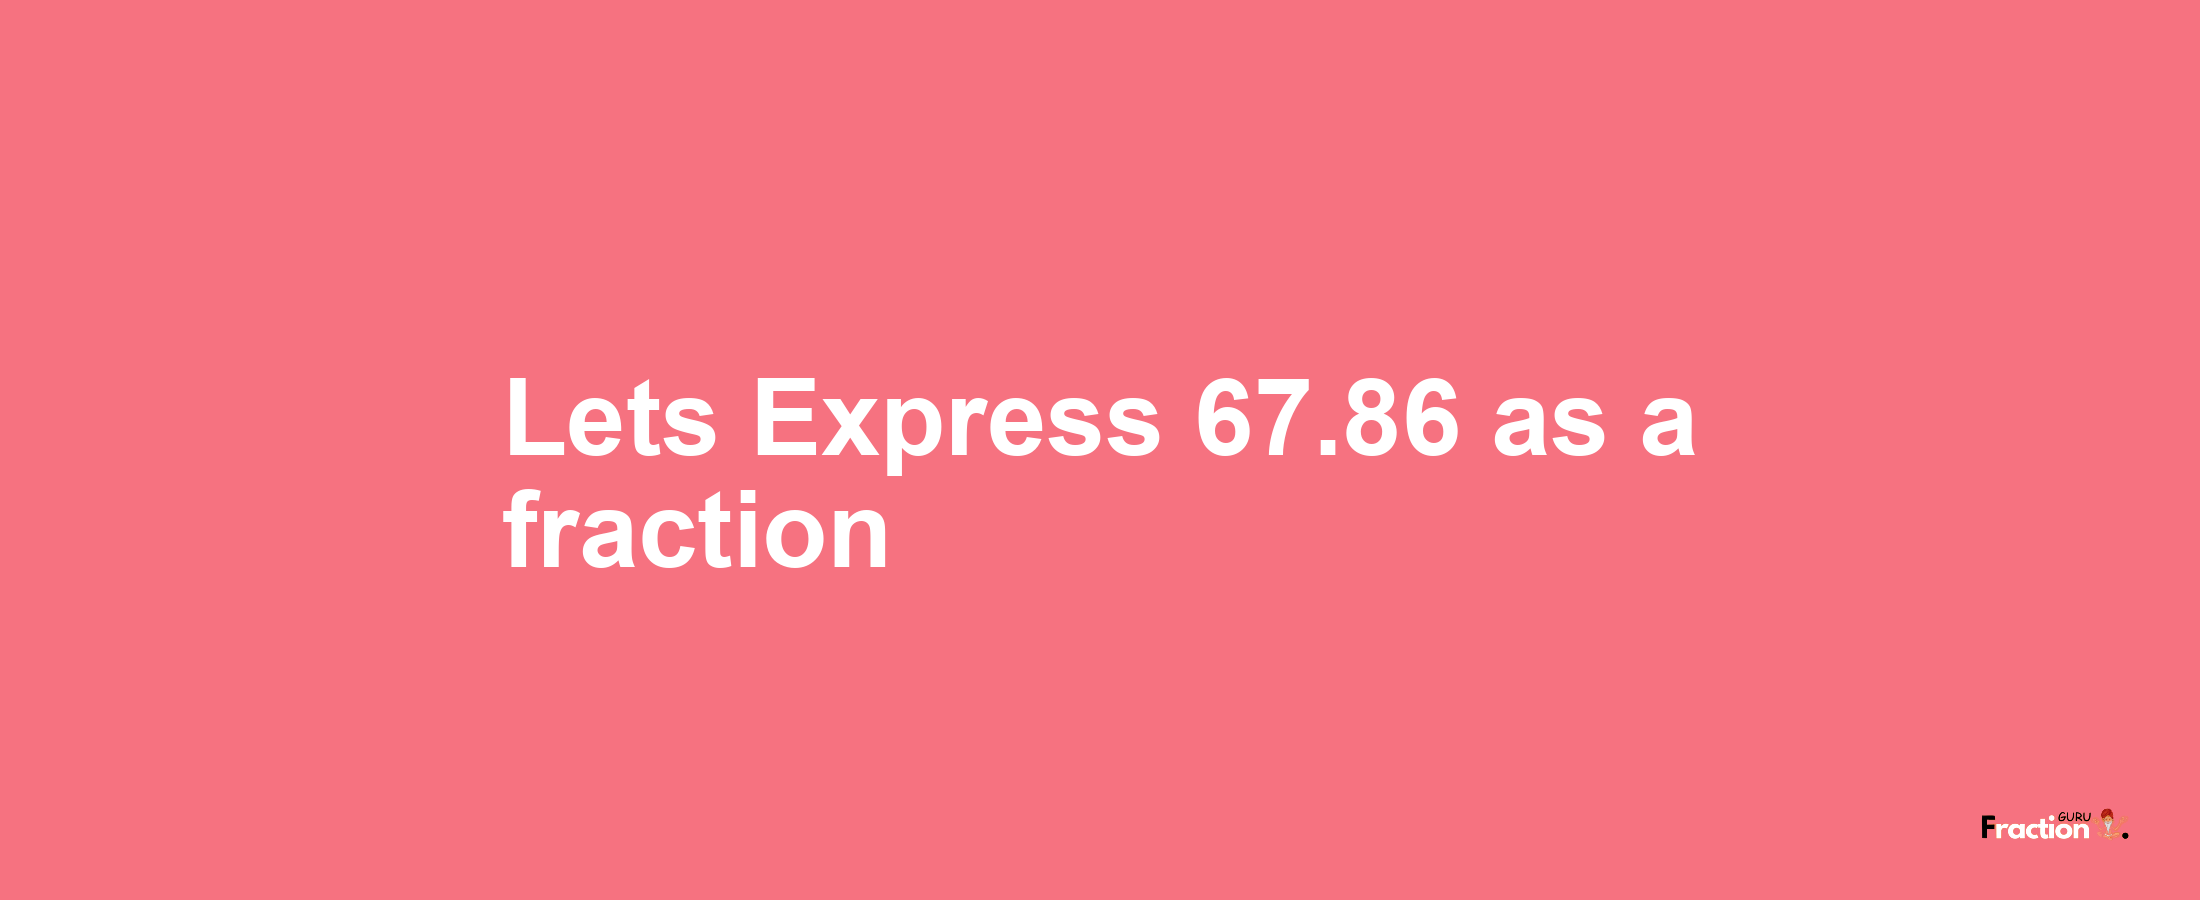 Lets Express 67.86 as afraction